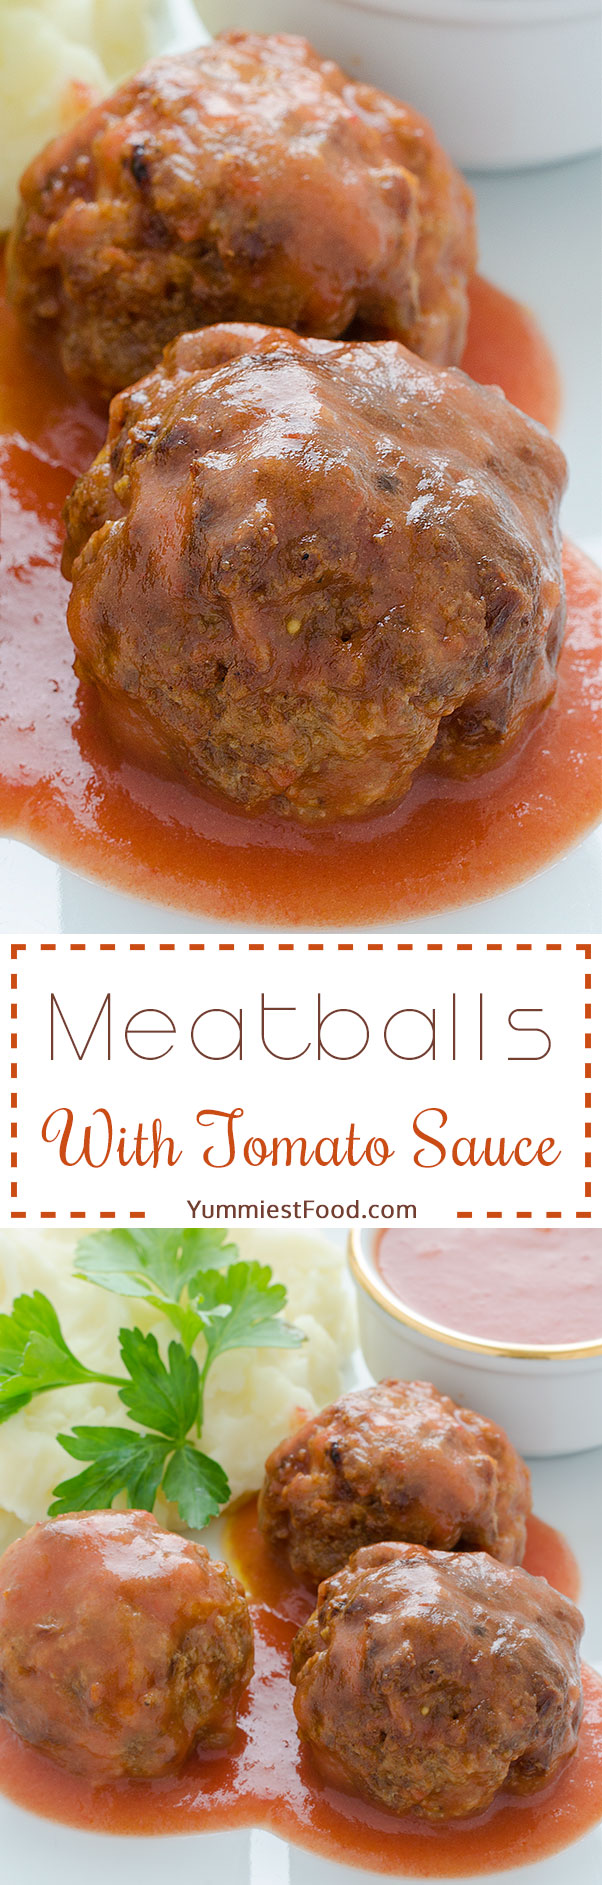 Meatballs With Tomato Sauce - Old, easy and delicious recipe - meatballs with tomato sauce which you will like the most